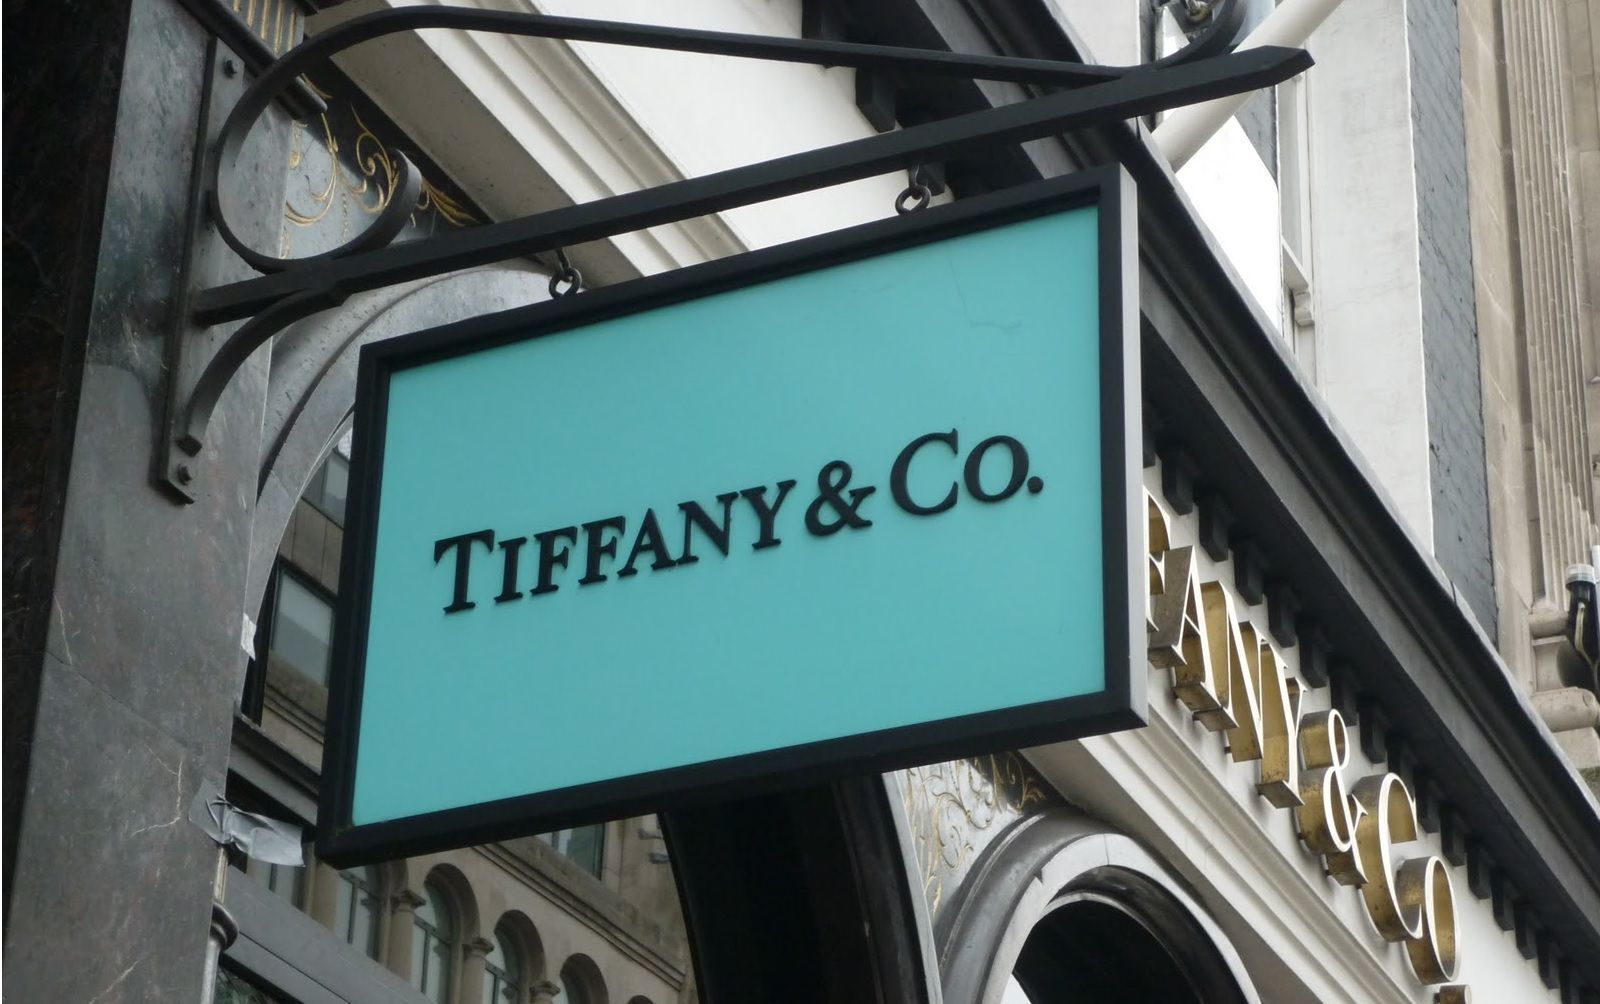 LVMH Calls Off Bid To Buy Tiffany & Co., Jeweler Sues Luxury Conglomerate